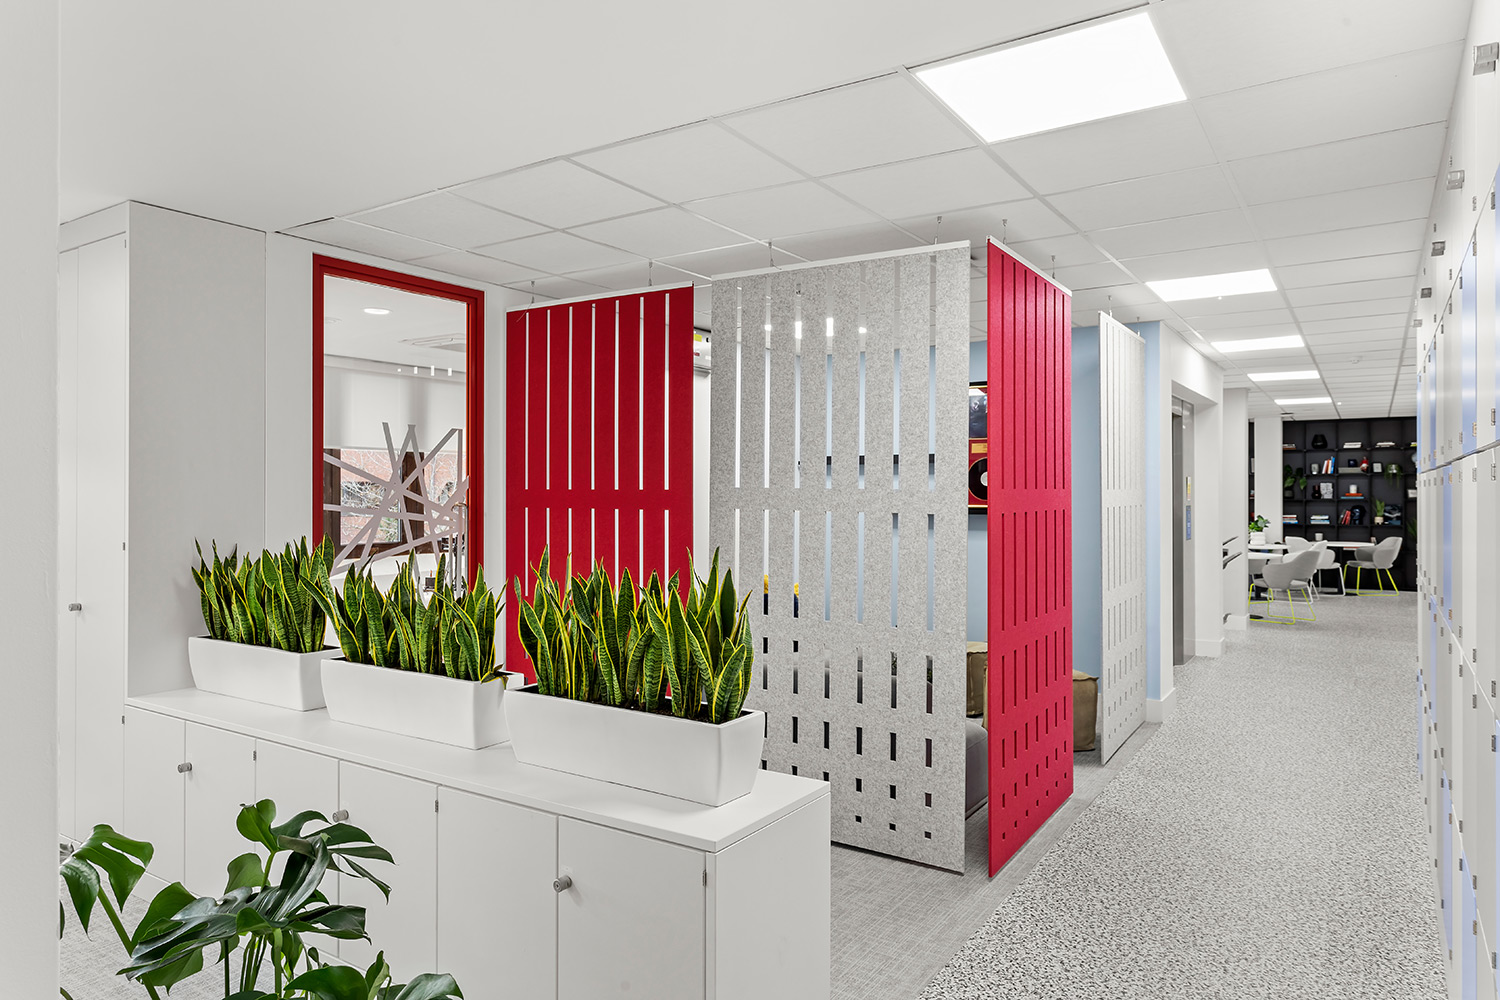 FRP Advisory Office Fit-Out Spacio